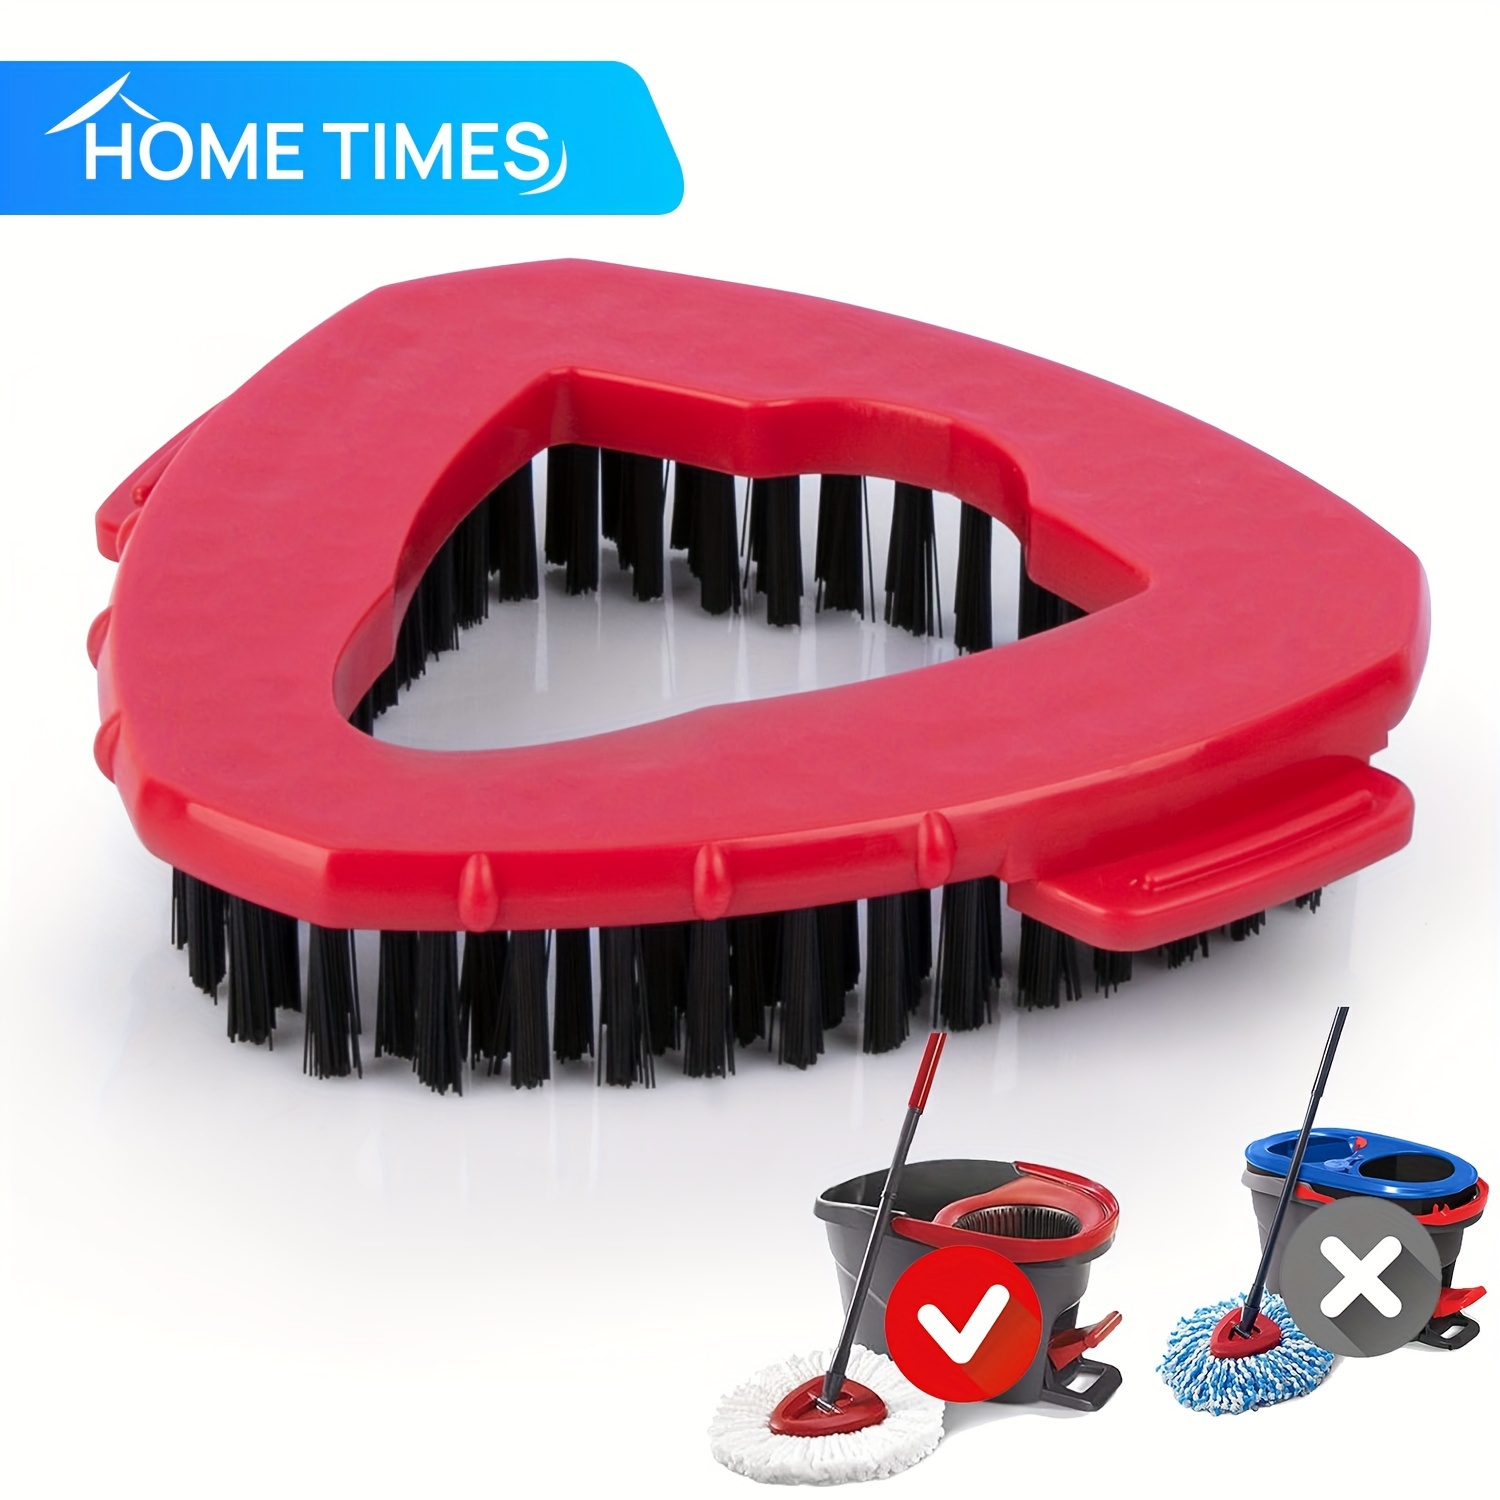 

Home Times Easywring Spin Mop Head Replacement - Durable Hard Bristle Scrub Brush For Bathroom, Kitchen Tile & Shower Floor Cleaning, Compatible With 1-tank System